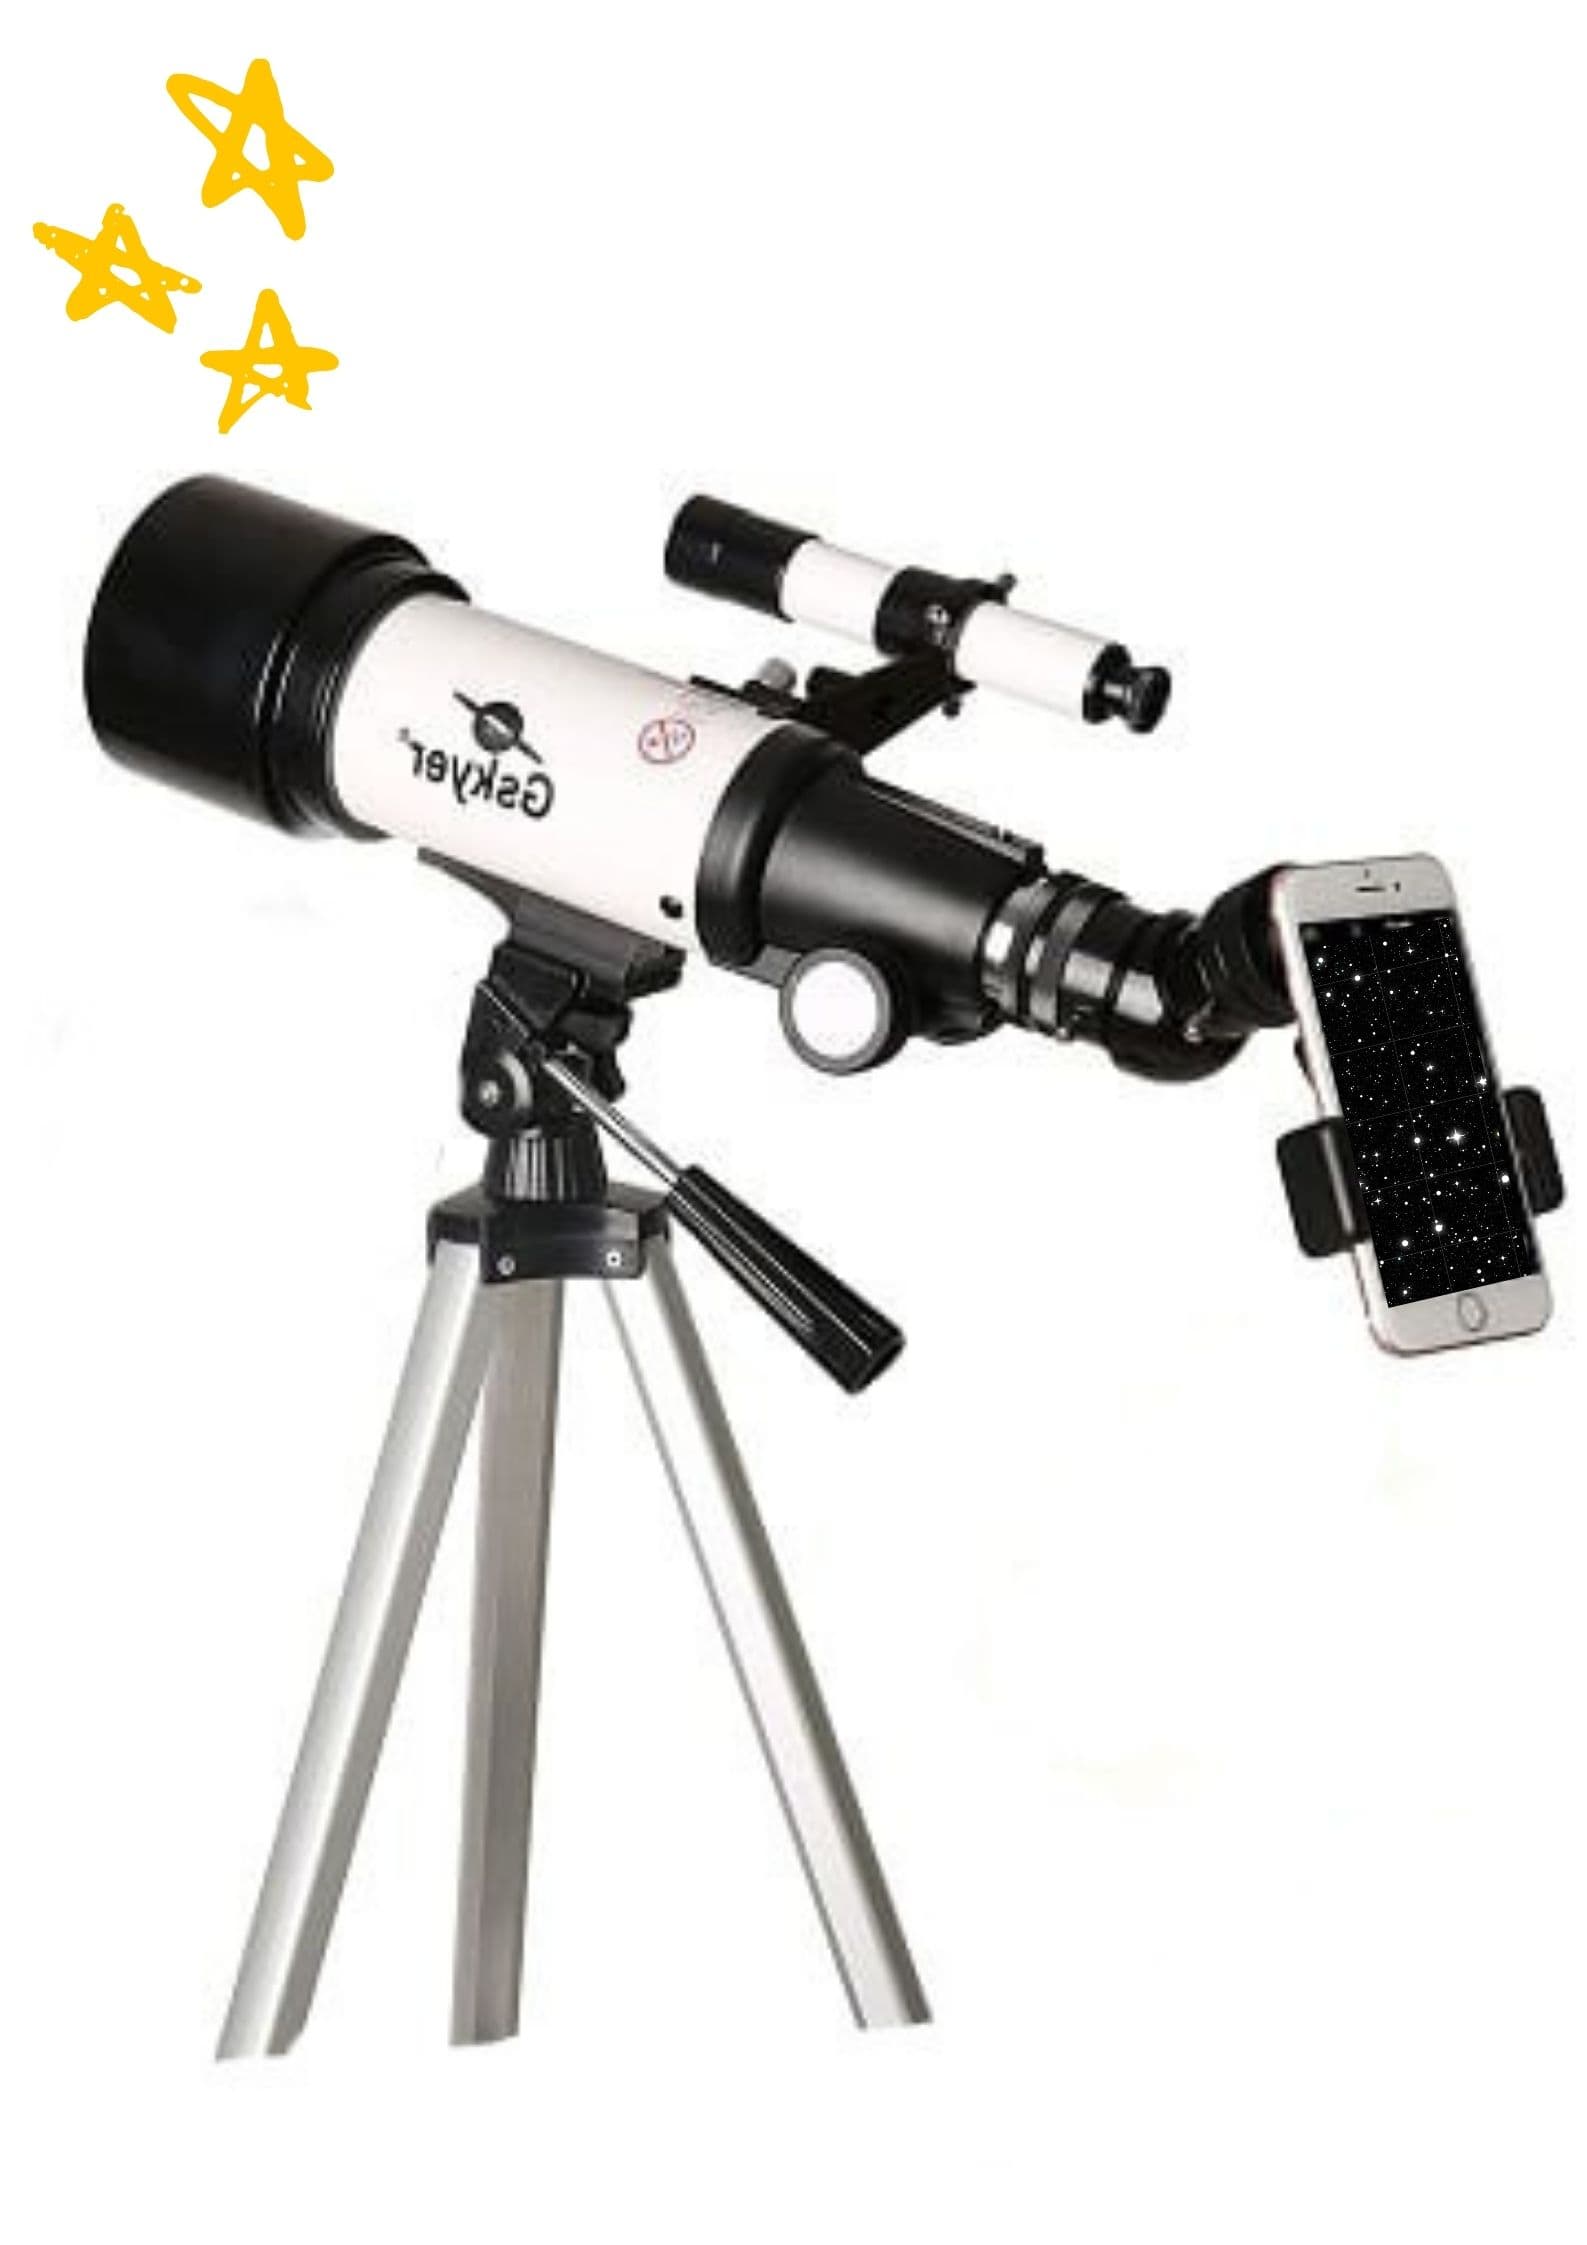 Best Telescope For Viewing Planets & Galaxies: Planet Viewing Doesn’t Have To Be Expensive 9